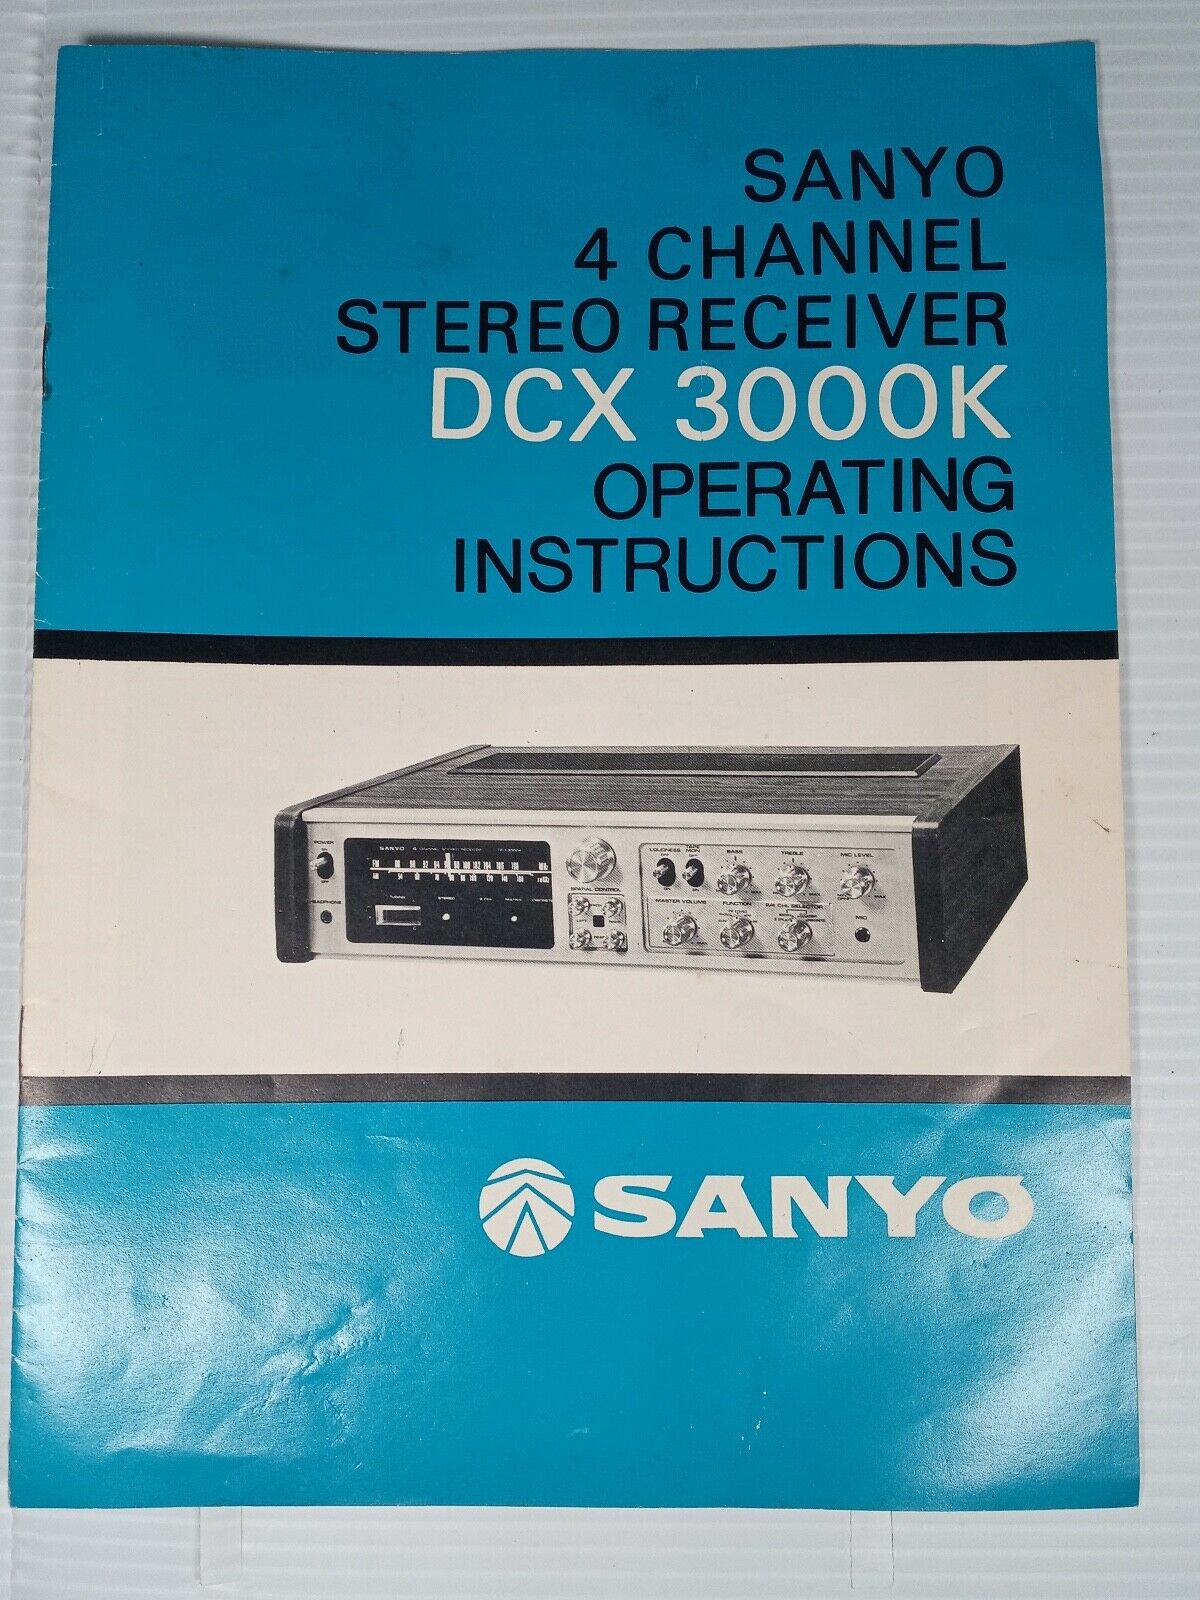 Sanyo Operating Instructions Manual Model Dcx3000k  4 Channel Stereo Receiver 72